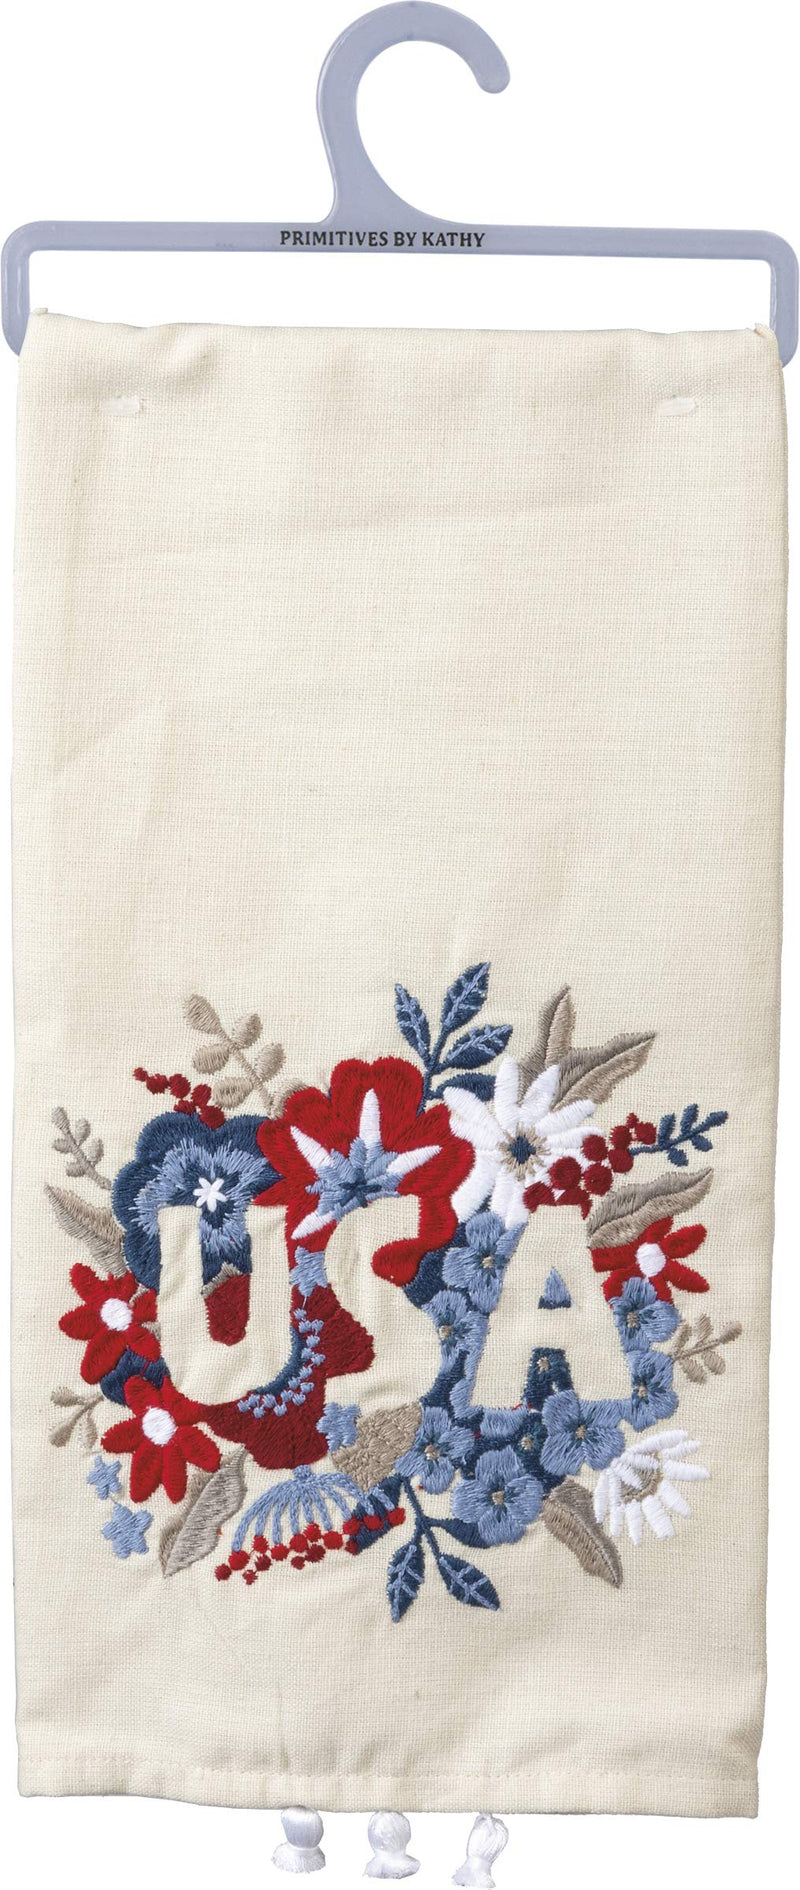 Primitives by Kathy Patriotic Embroidered Dish Towel, 20 x 26-Inches, Floral USA